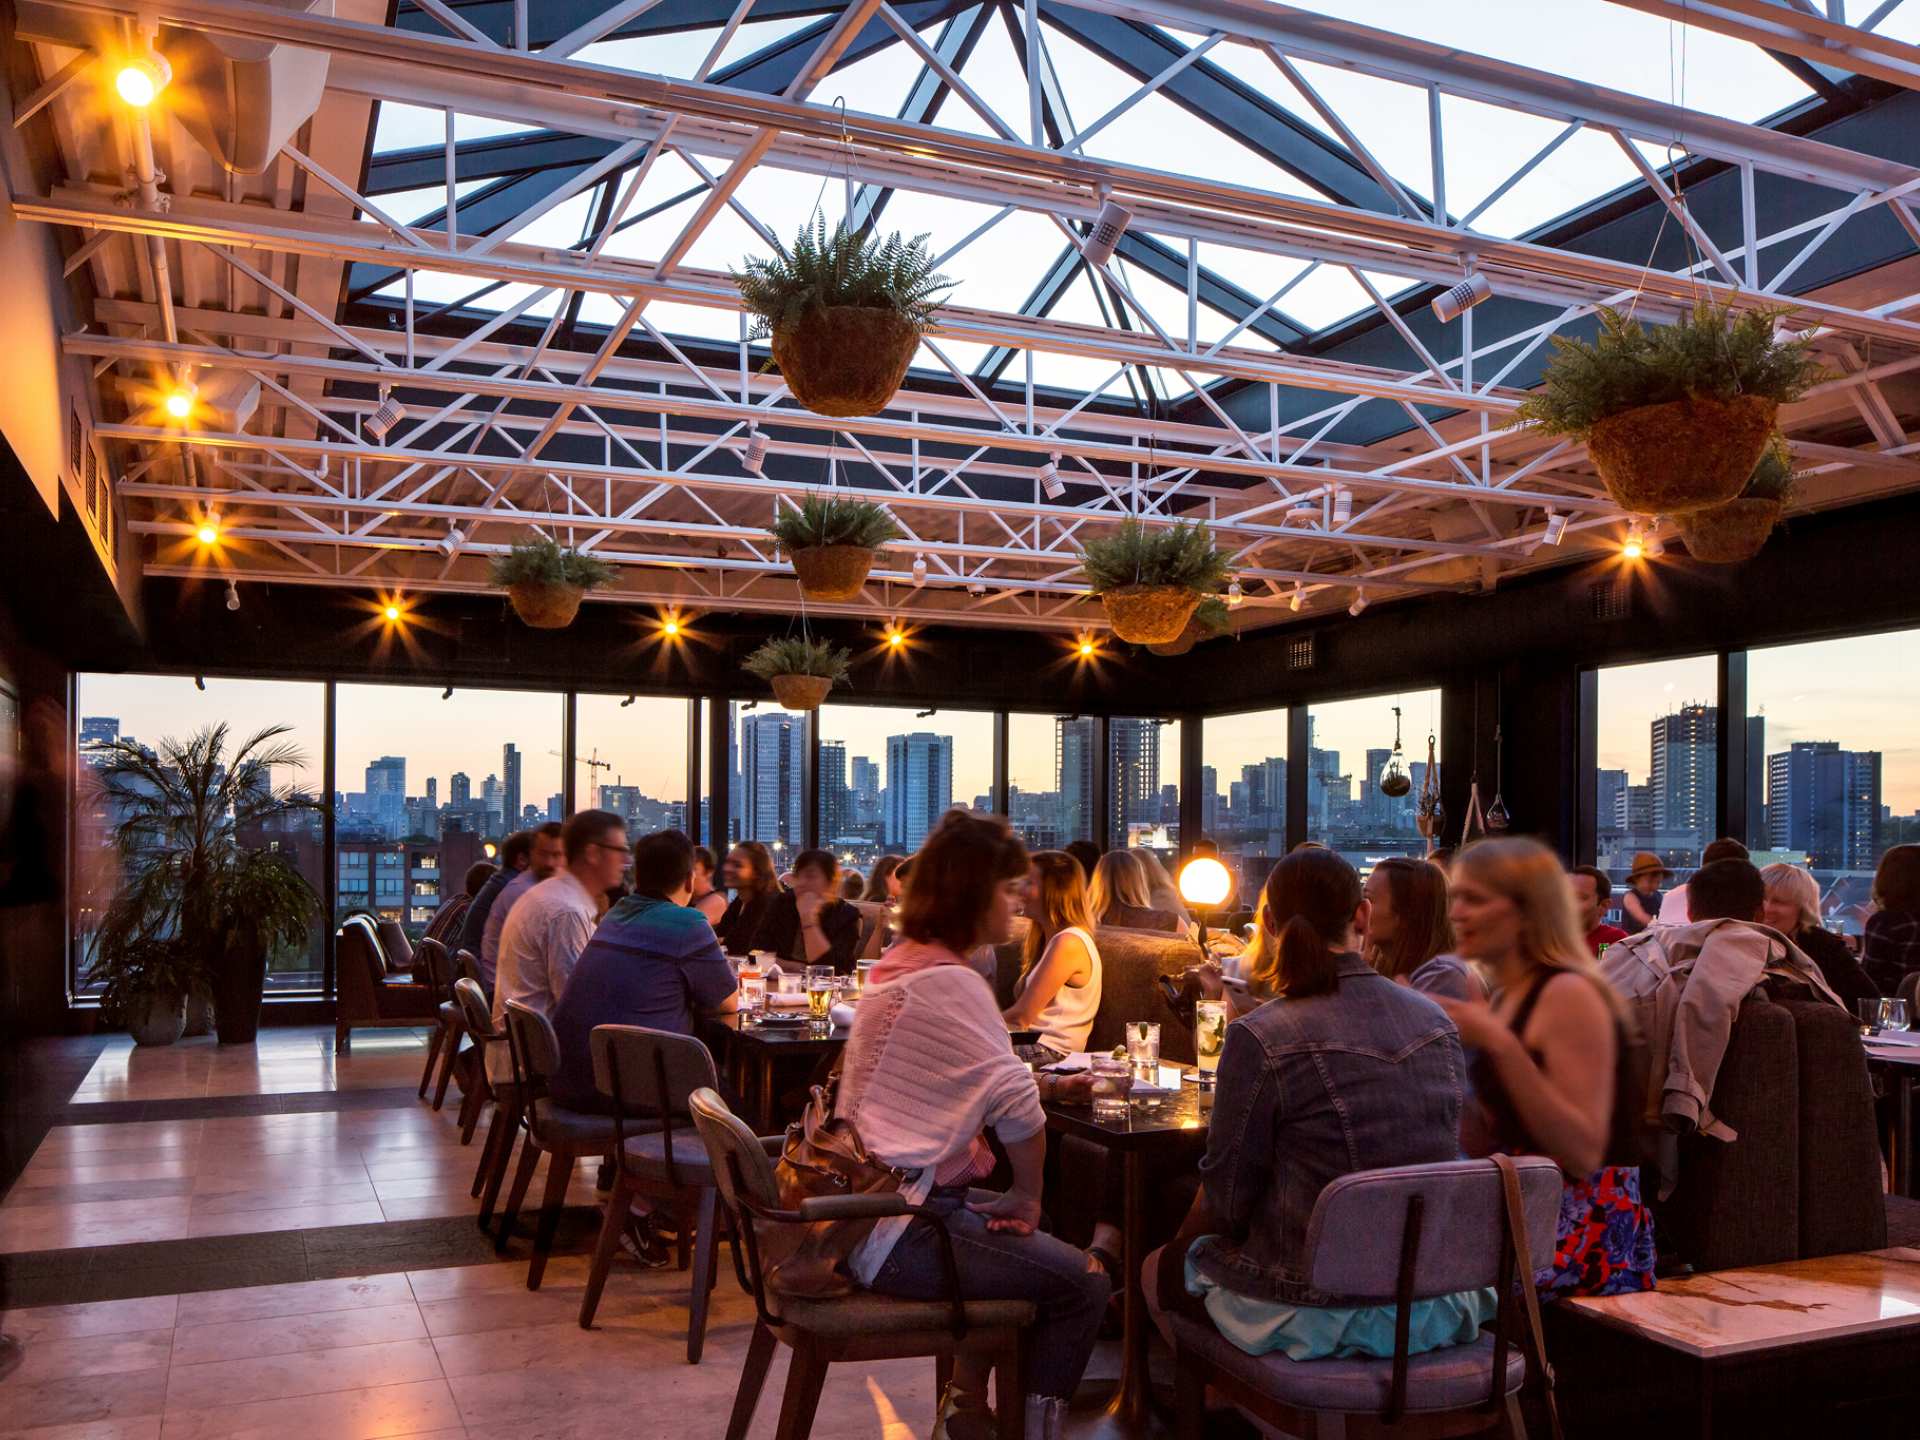 Best patios in Toronto | The crowded indoor space at The Rooftop at The Broadview Hotel